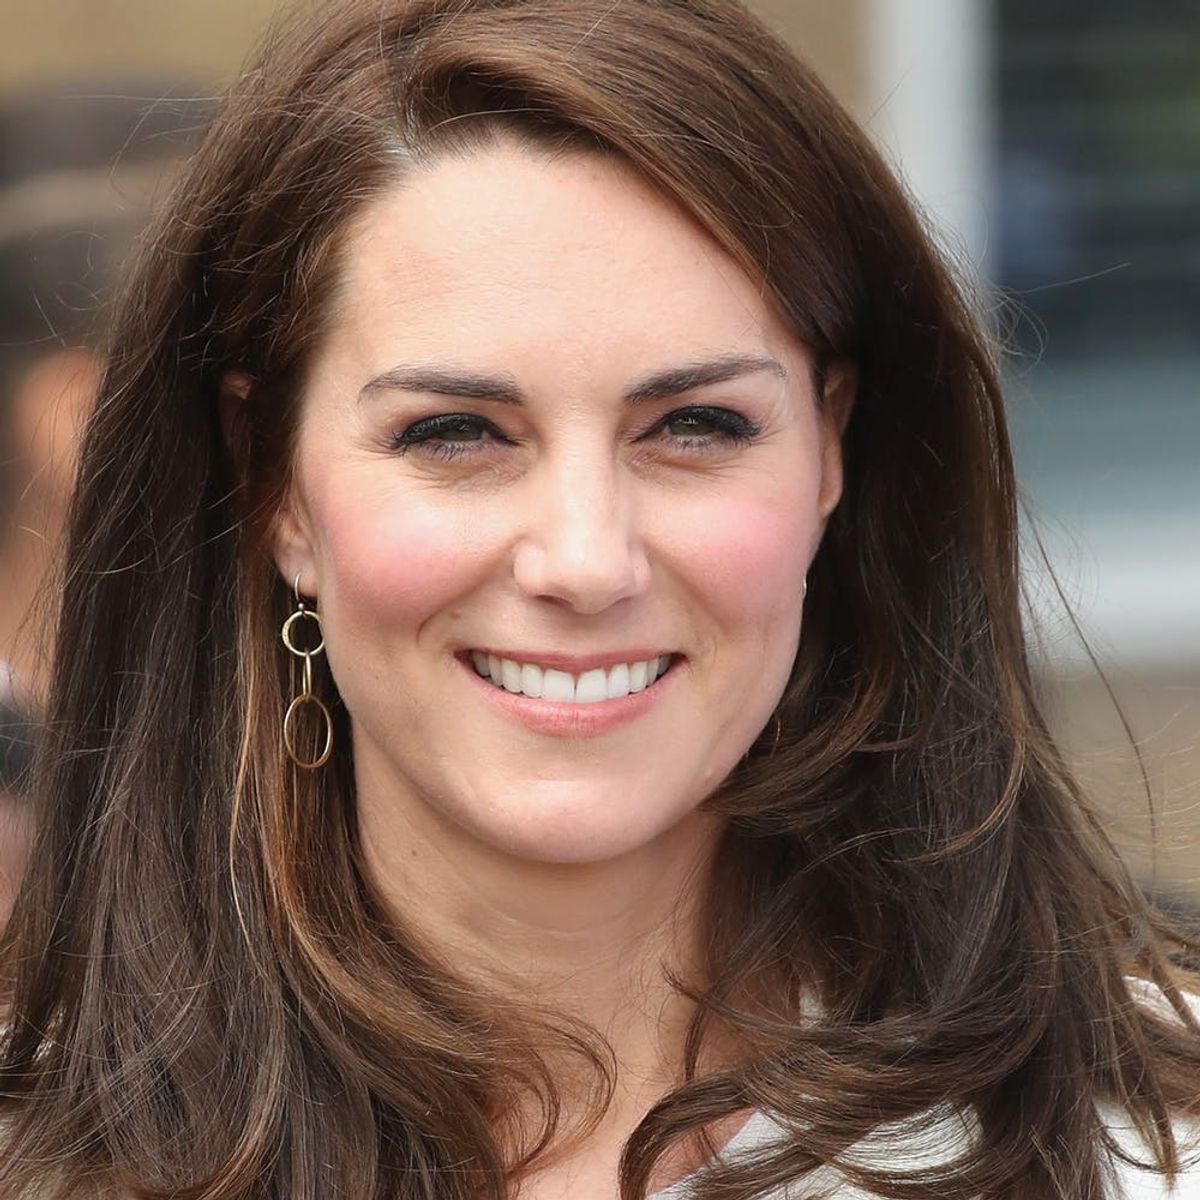 Kate Middleton Debuts Shorter Hairstyle for Second Post-Pregnancy Appearance